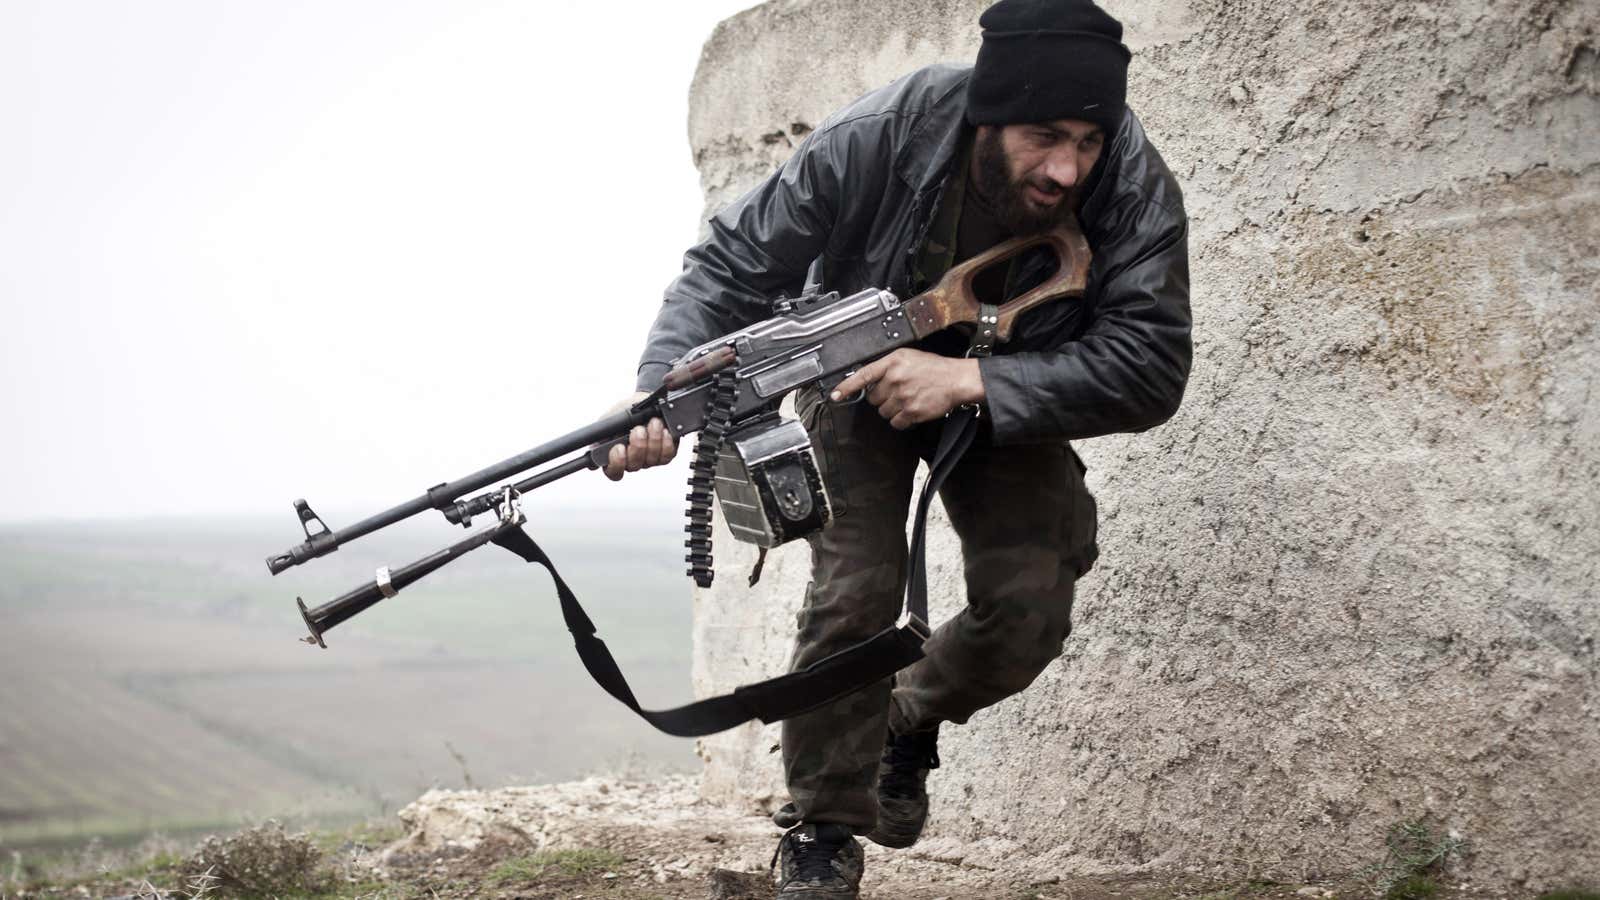 The Free Syrian Army is one of the more moderate rebel groups.